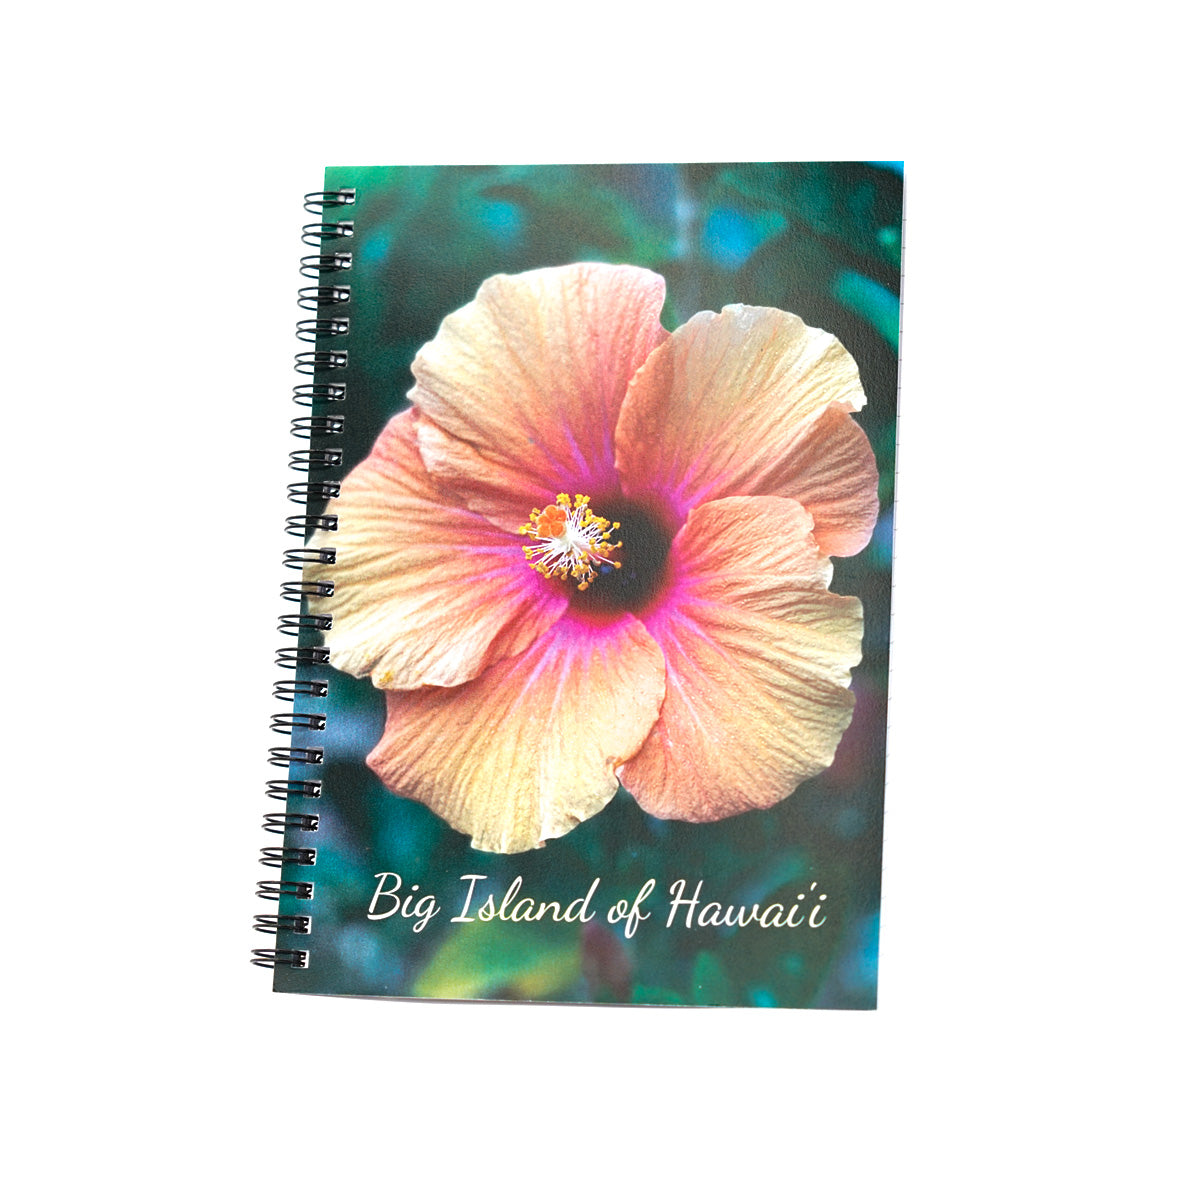 Spiral Bound Ruled Notebook Journal - Radiant Hibiscus